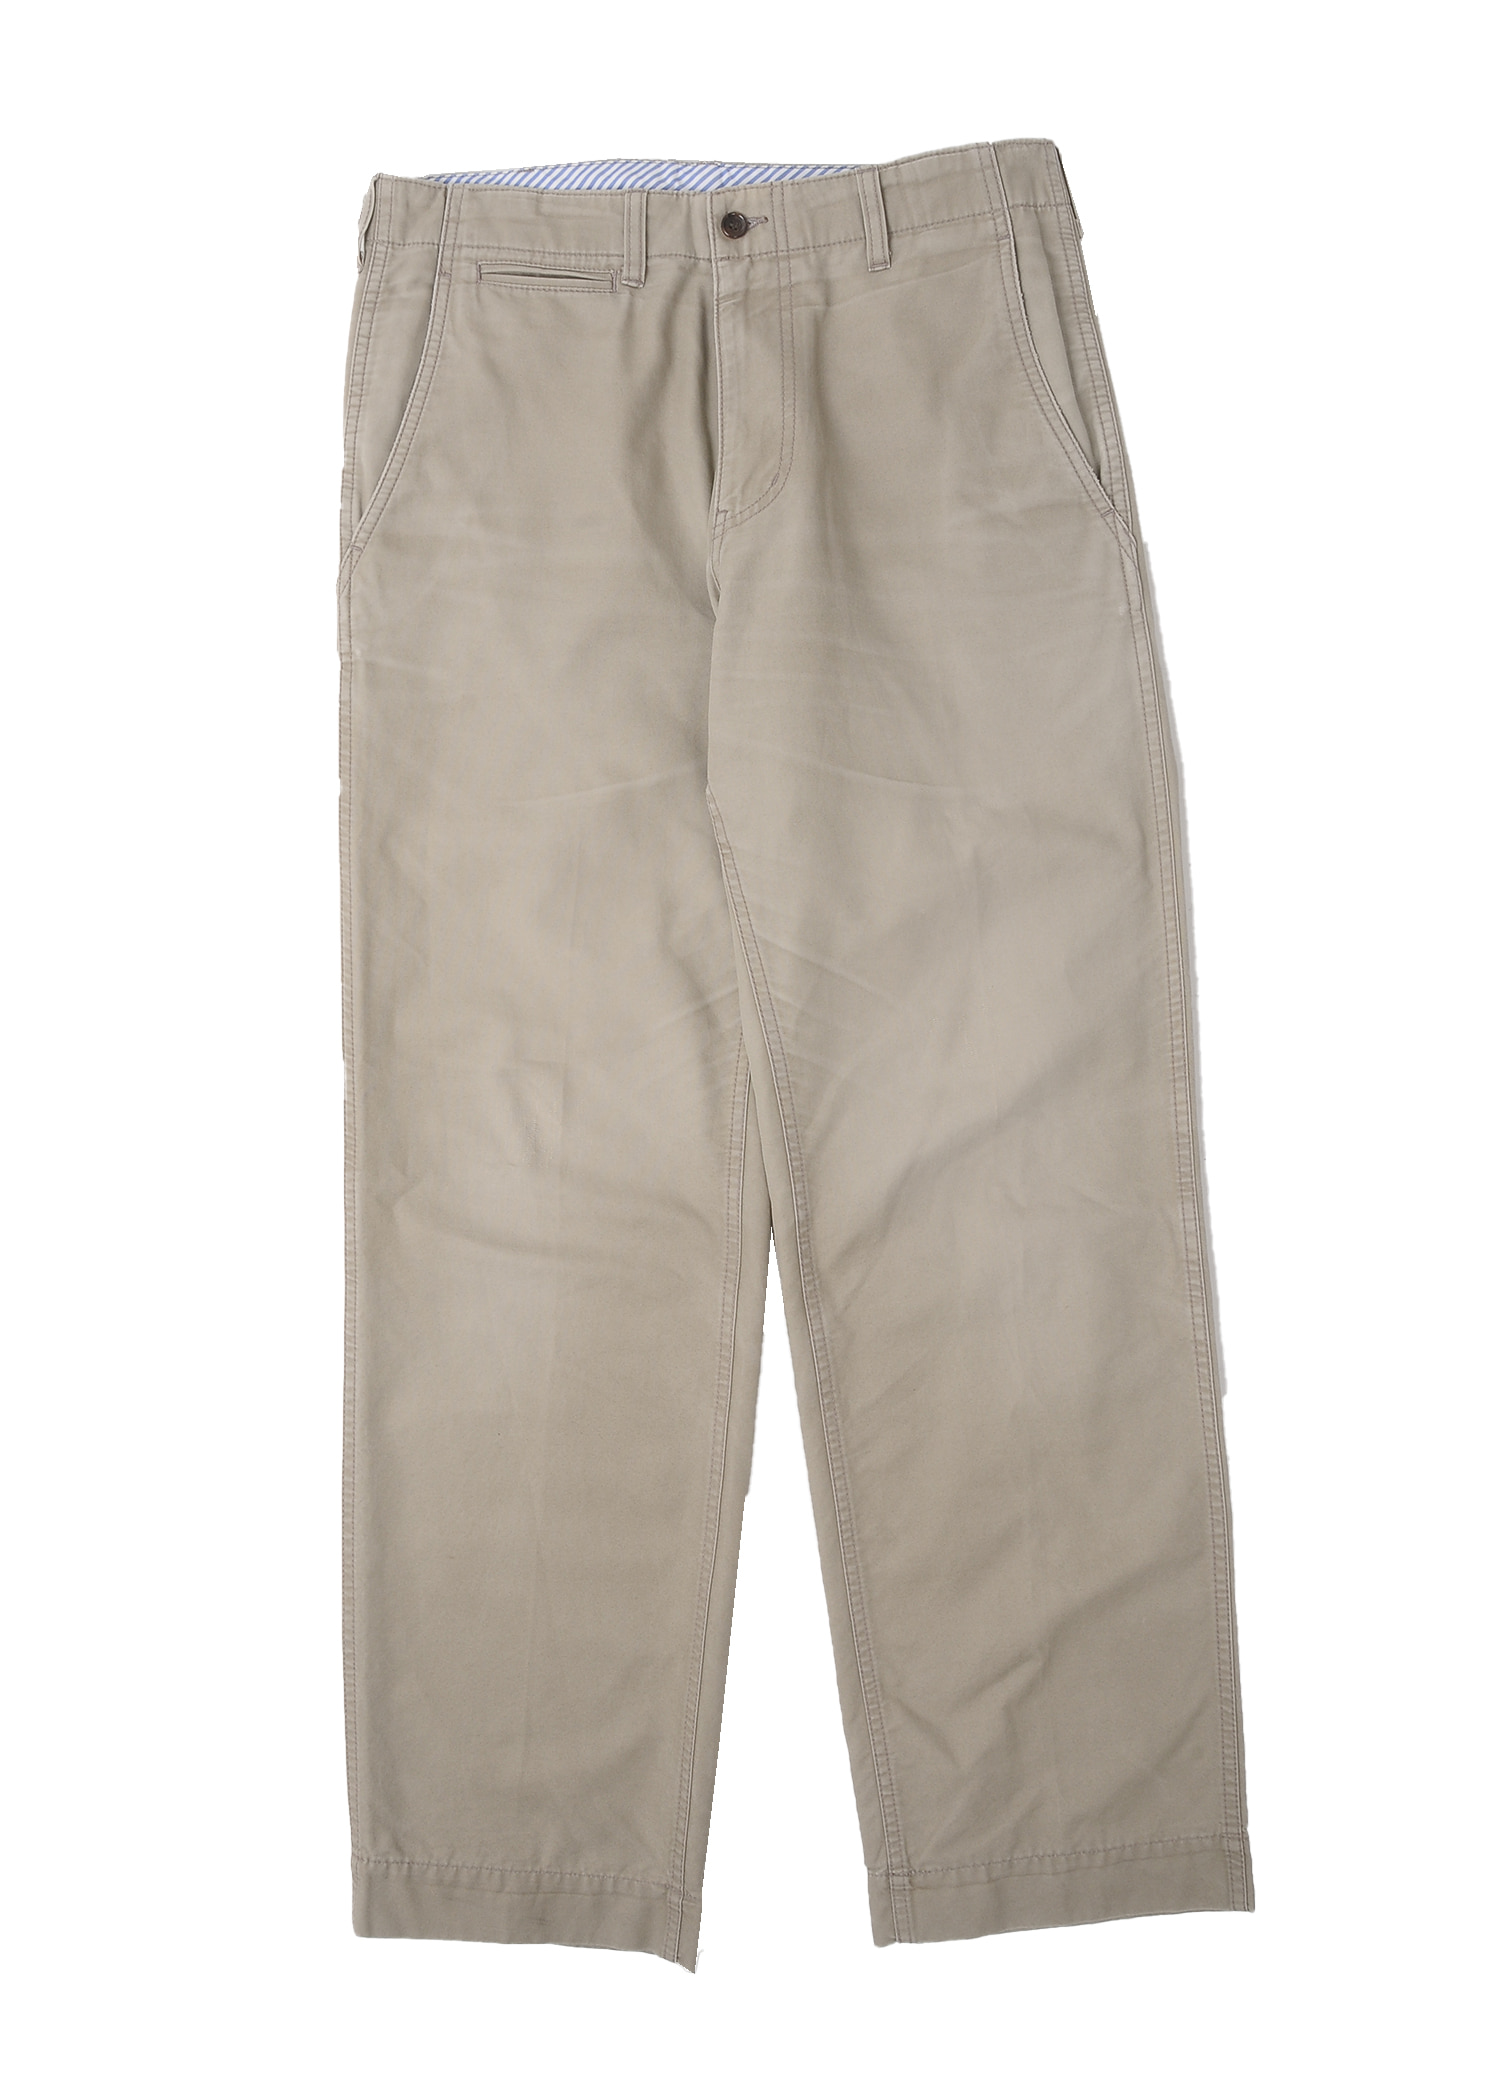 COMME des GARCONS HOMME  chino pants